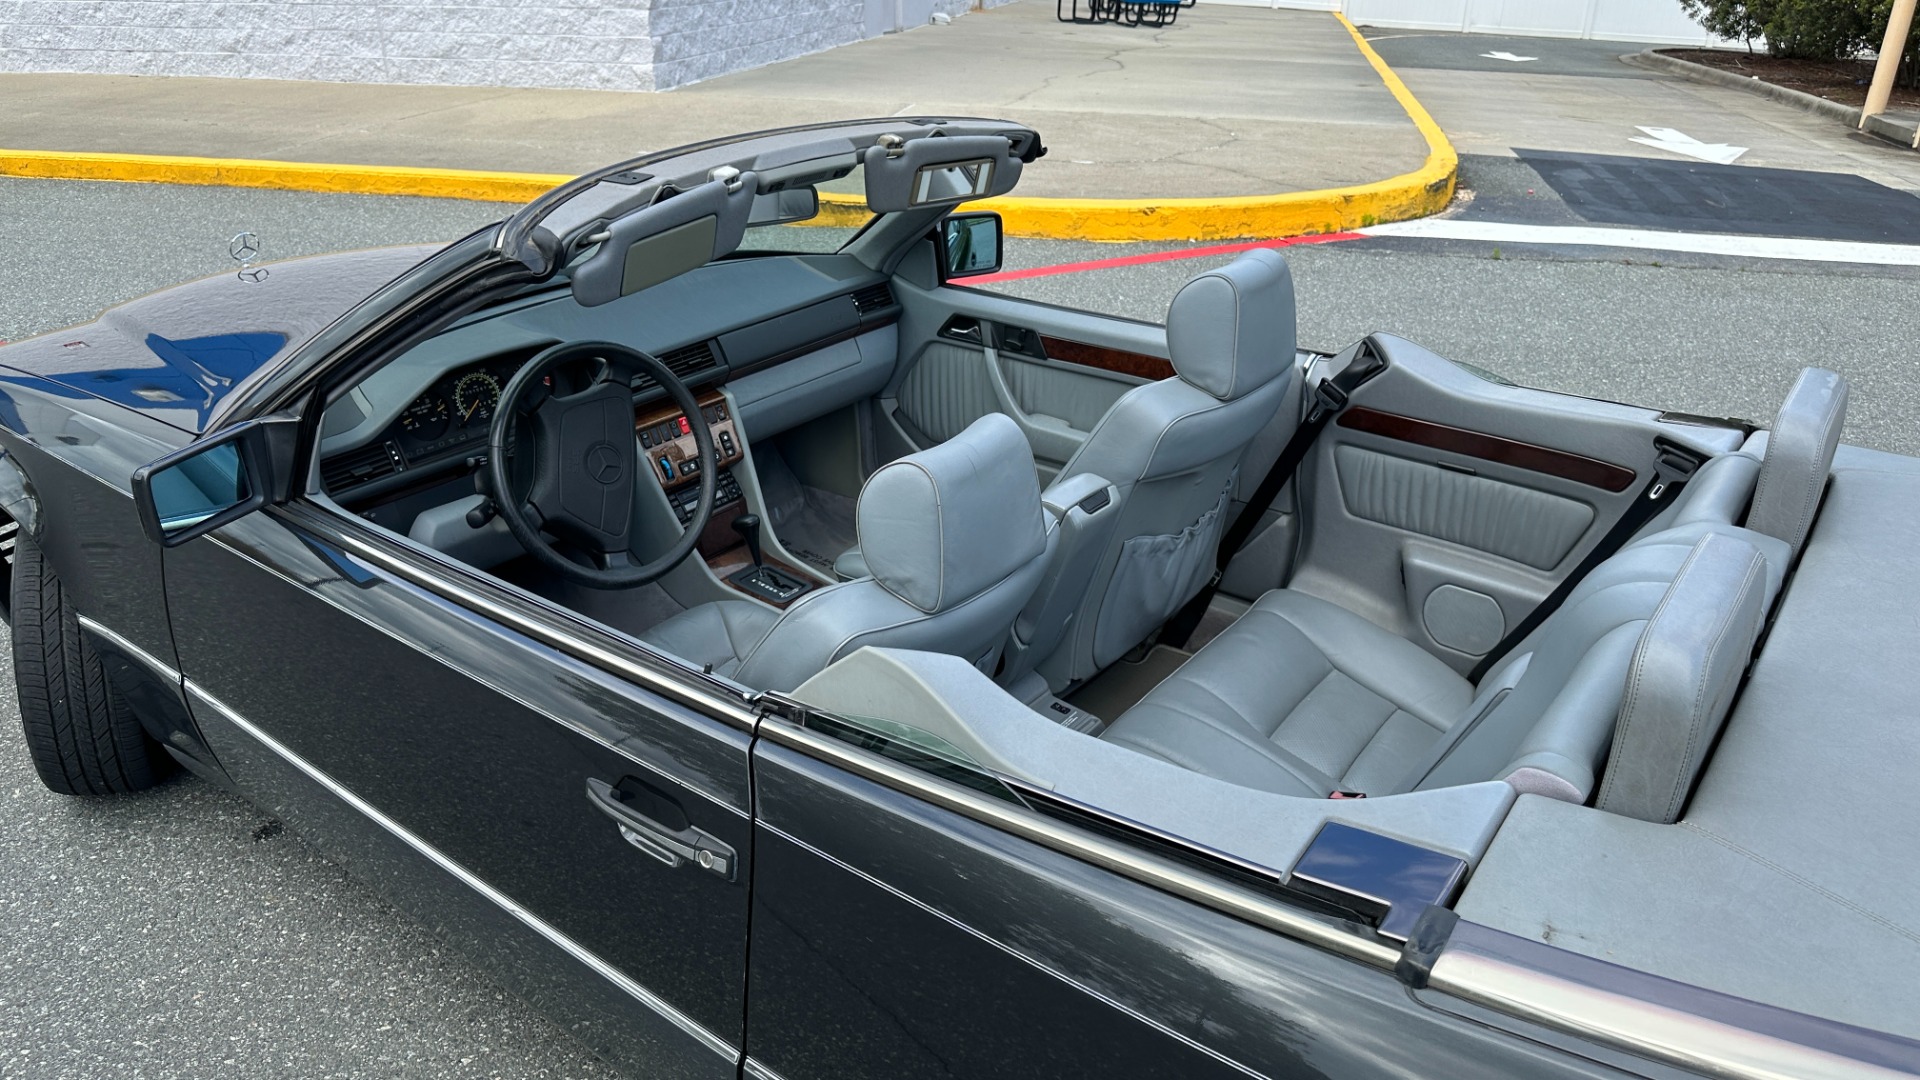 Used 1994 Mercedes-Benz 300 Series E 320 / CONVERTIBLE / MEMORY / POWER TOP / INLINE 6CYL / LEATHER for sale $17,000 at Formula Imports in Charlotte NC 28227 37